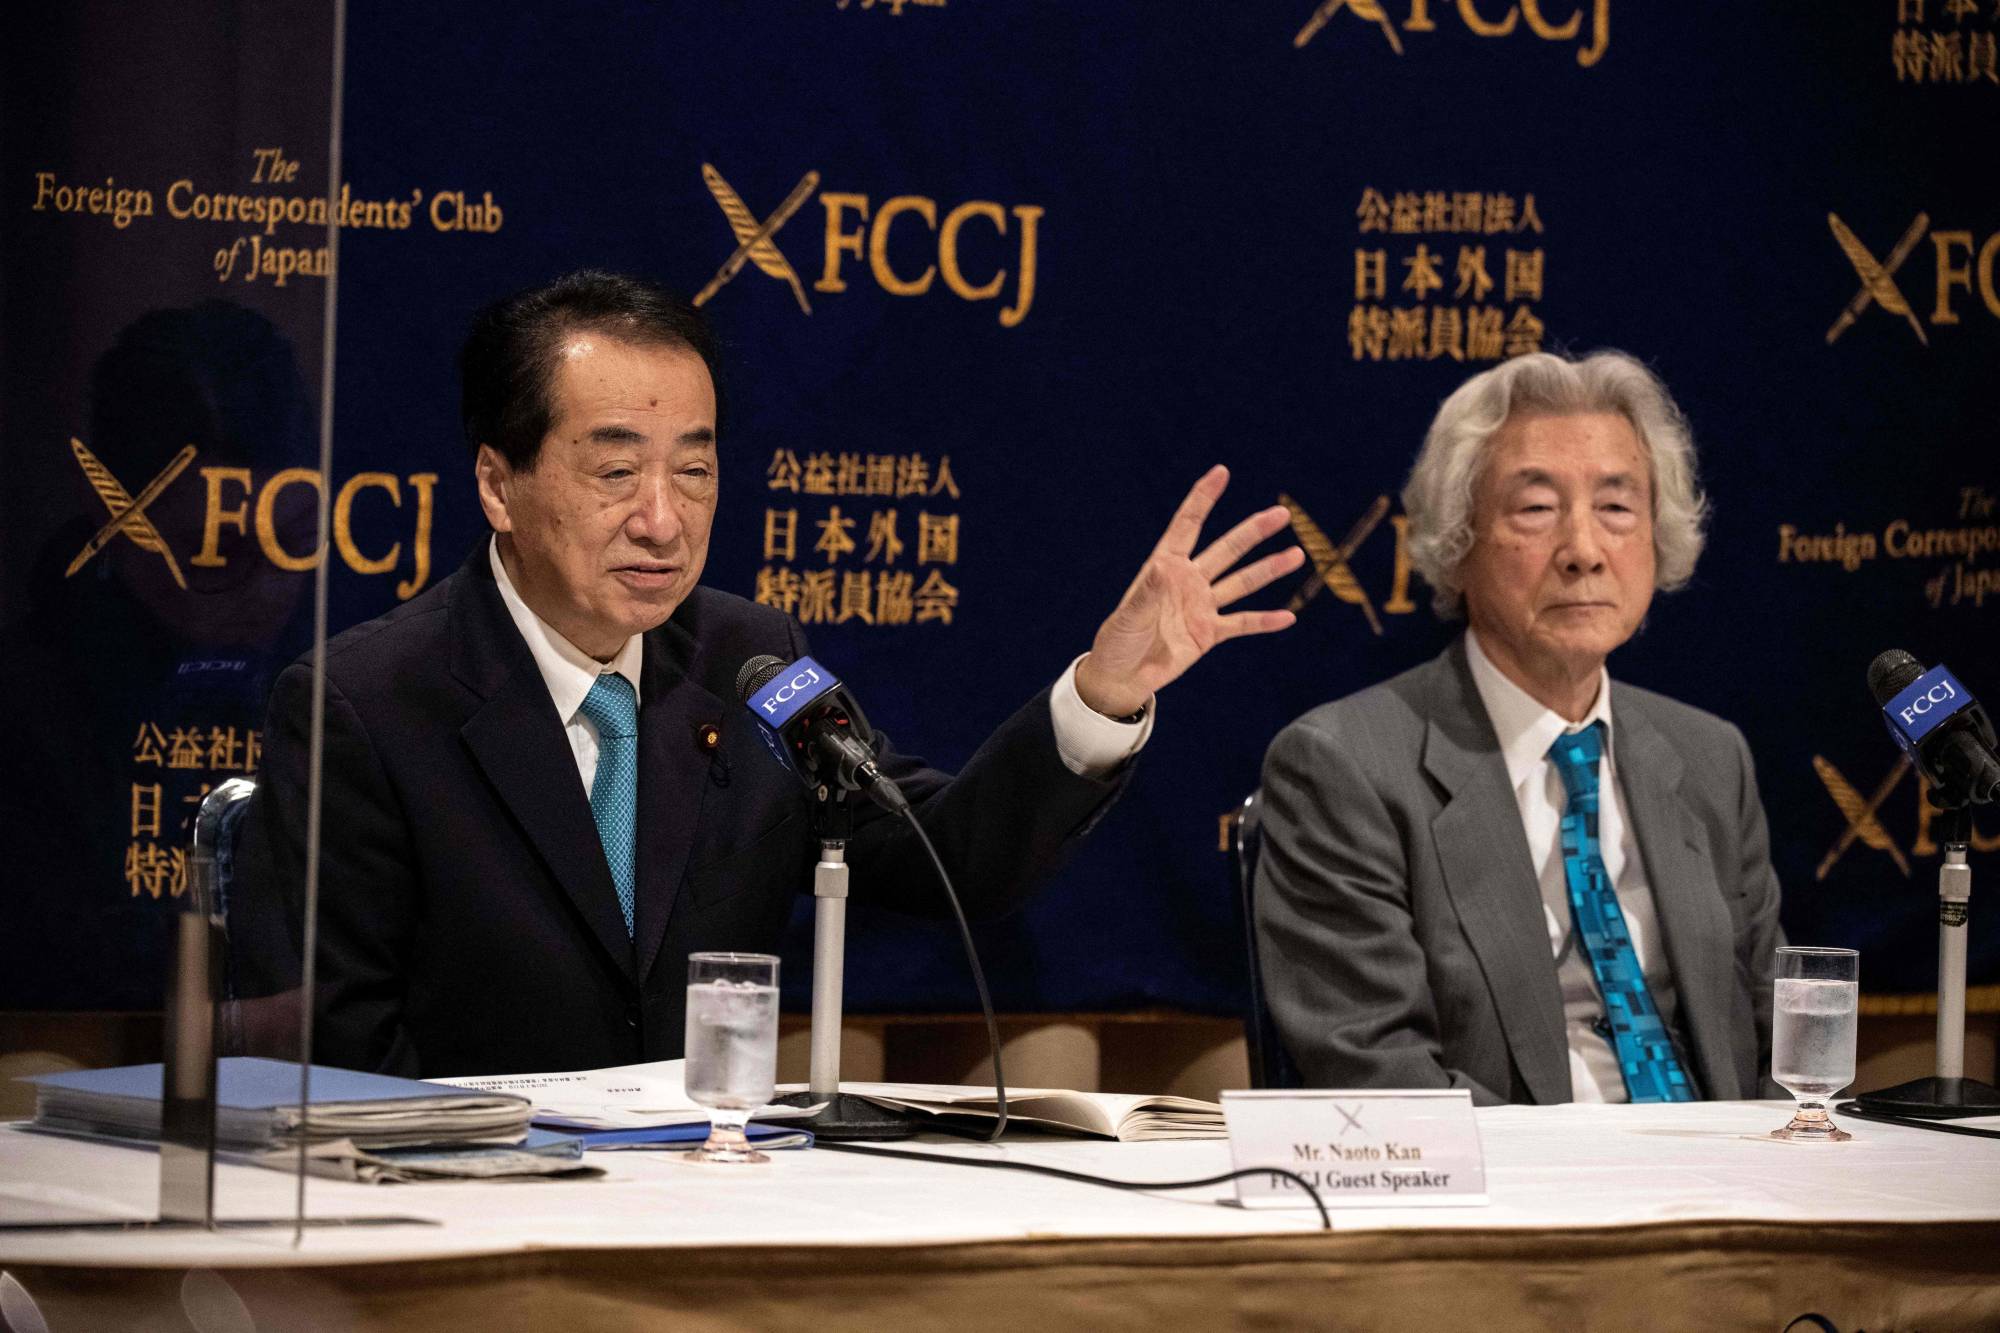 Former Prime Ministers Naoto Kan and Junichiro Koizumi will hold a press conference at the Japanese Foreign Correspondents Club in Tokyo on March 1 from AFP-JIJI